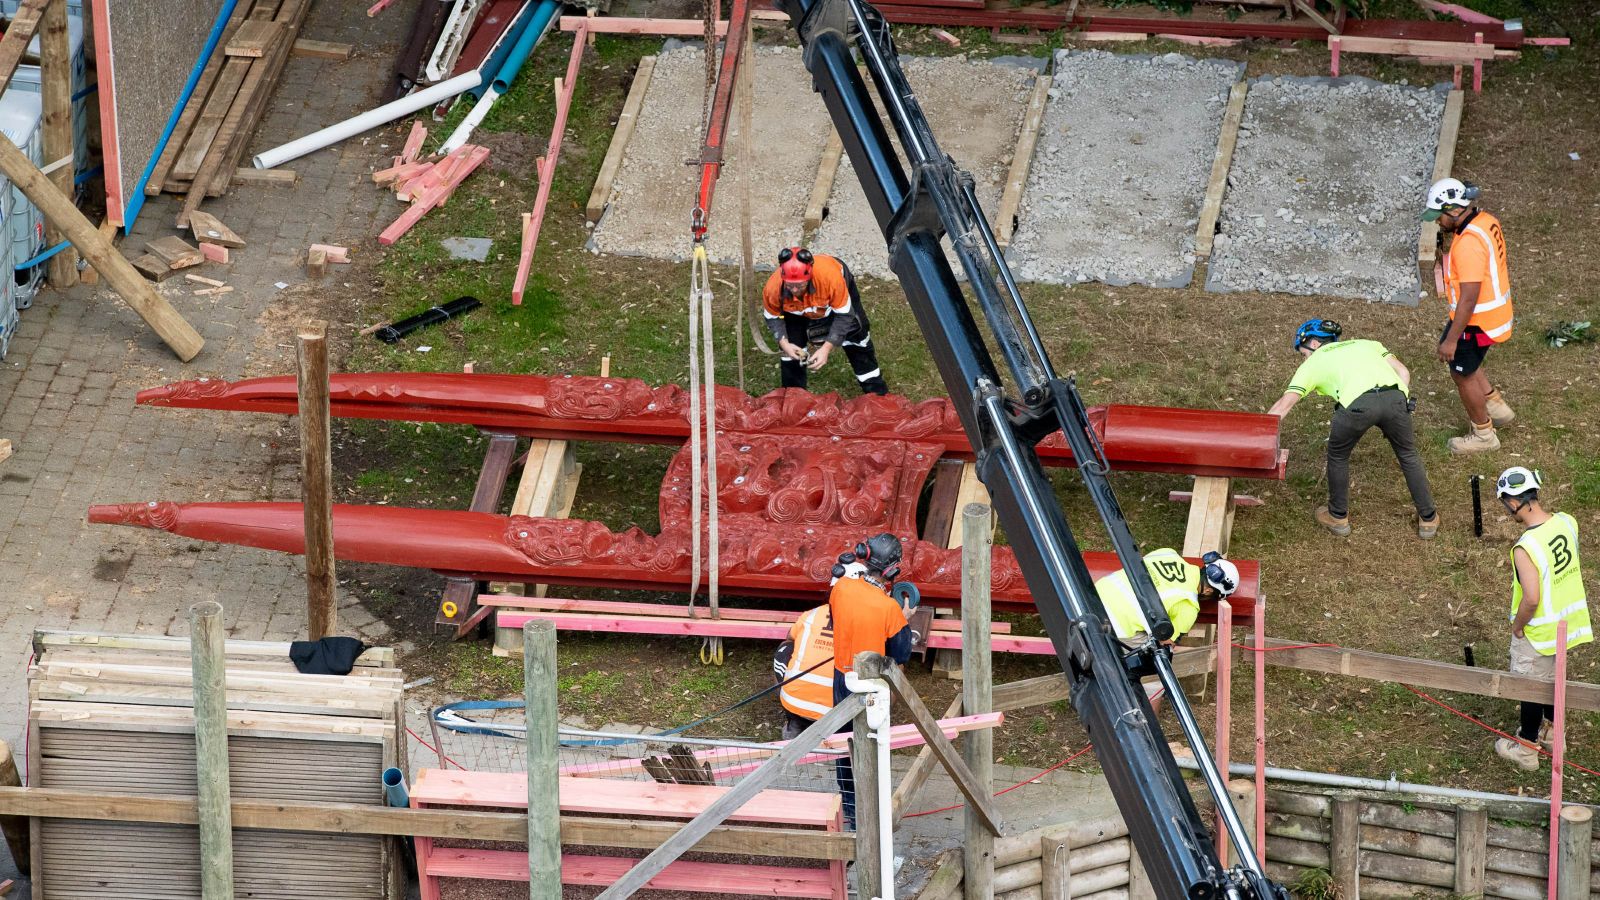 An aerial view of a carved waharoa (entranceway) being winched by a crew of construction workers in high vis vests and laid on the ground.